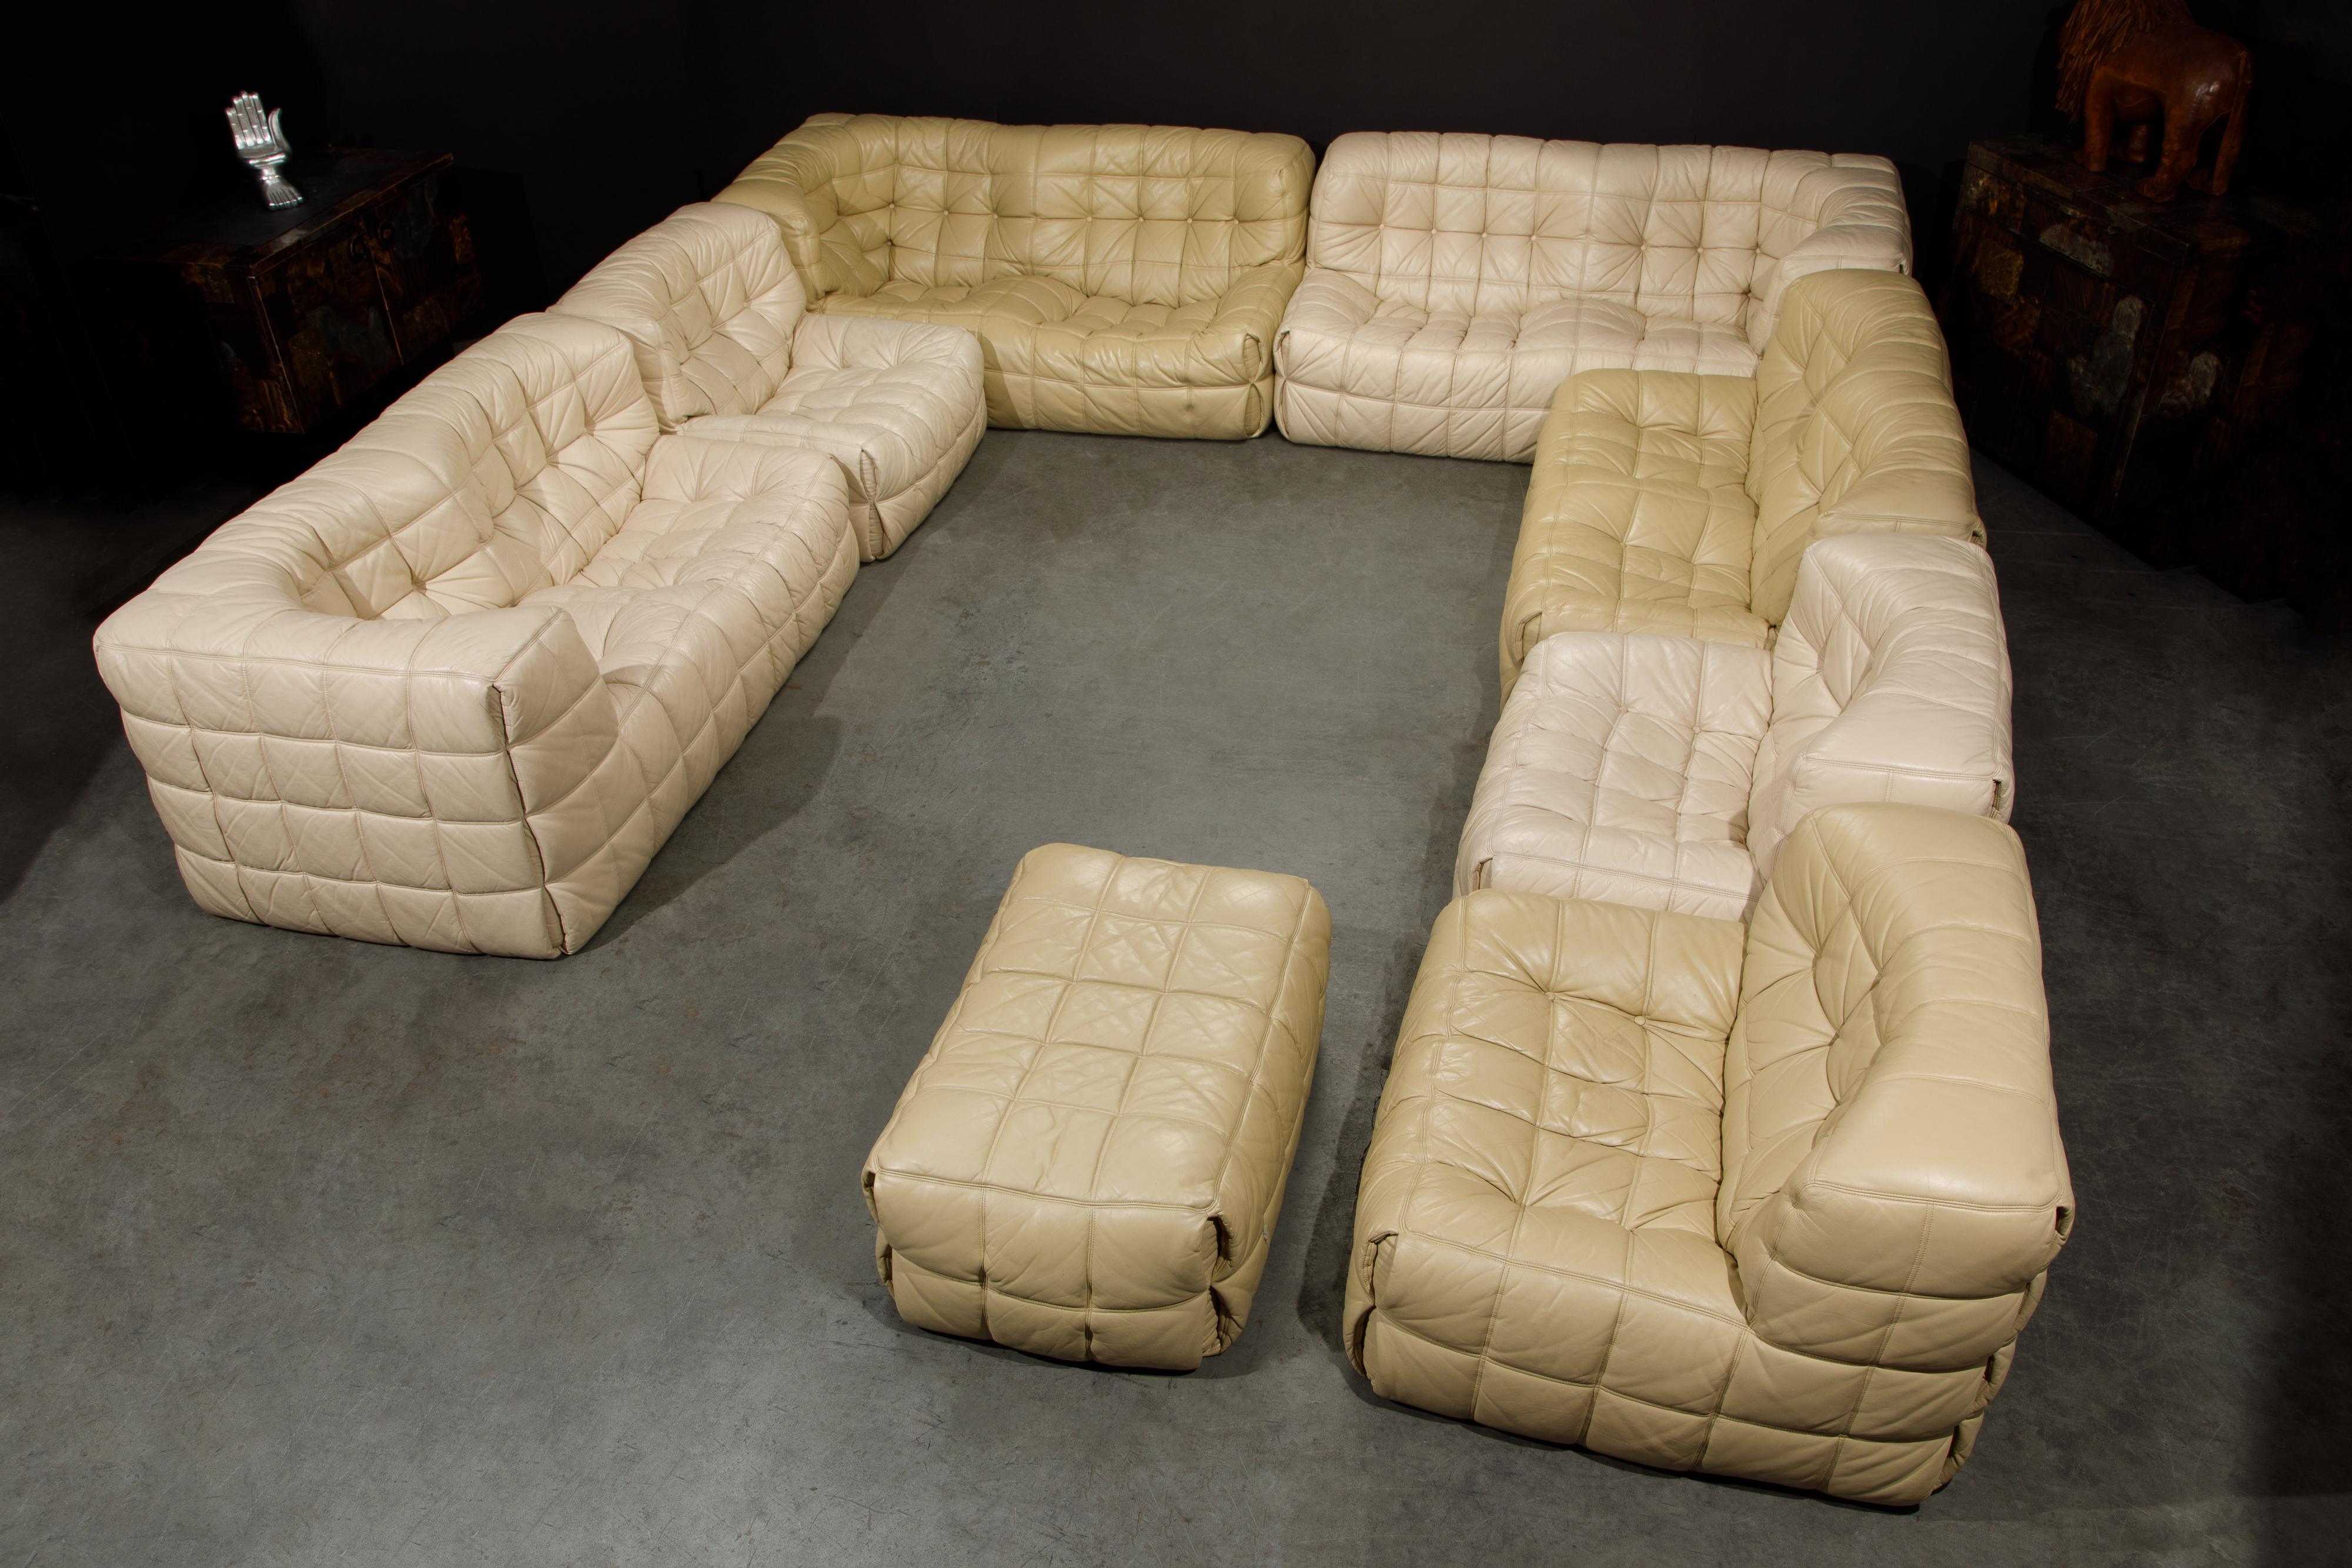 This incredibly large set, which is also incredibly rare and sought-after, called the 'Kashima' series by Michel Ducaroy for Ligne Roset, France, was designed in 1976. This extremely large eight piece is is comprised of 2 smaller sets which we